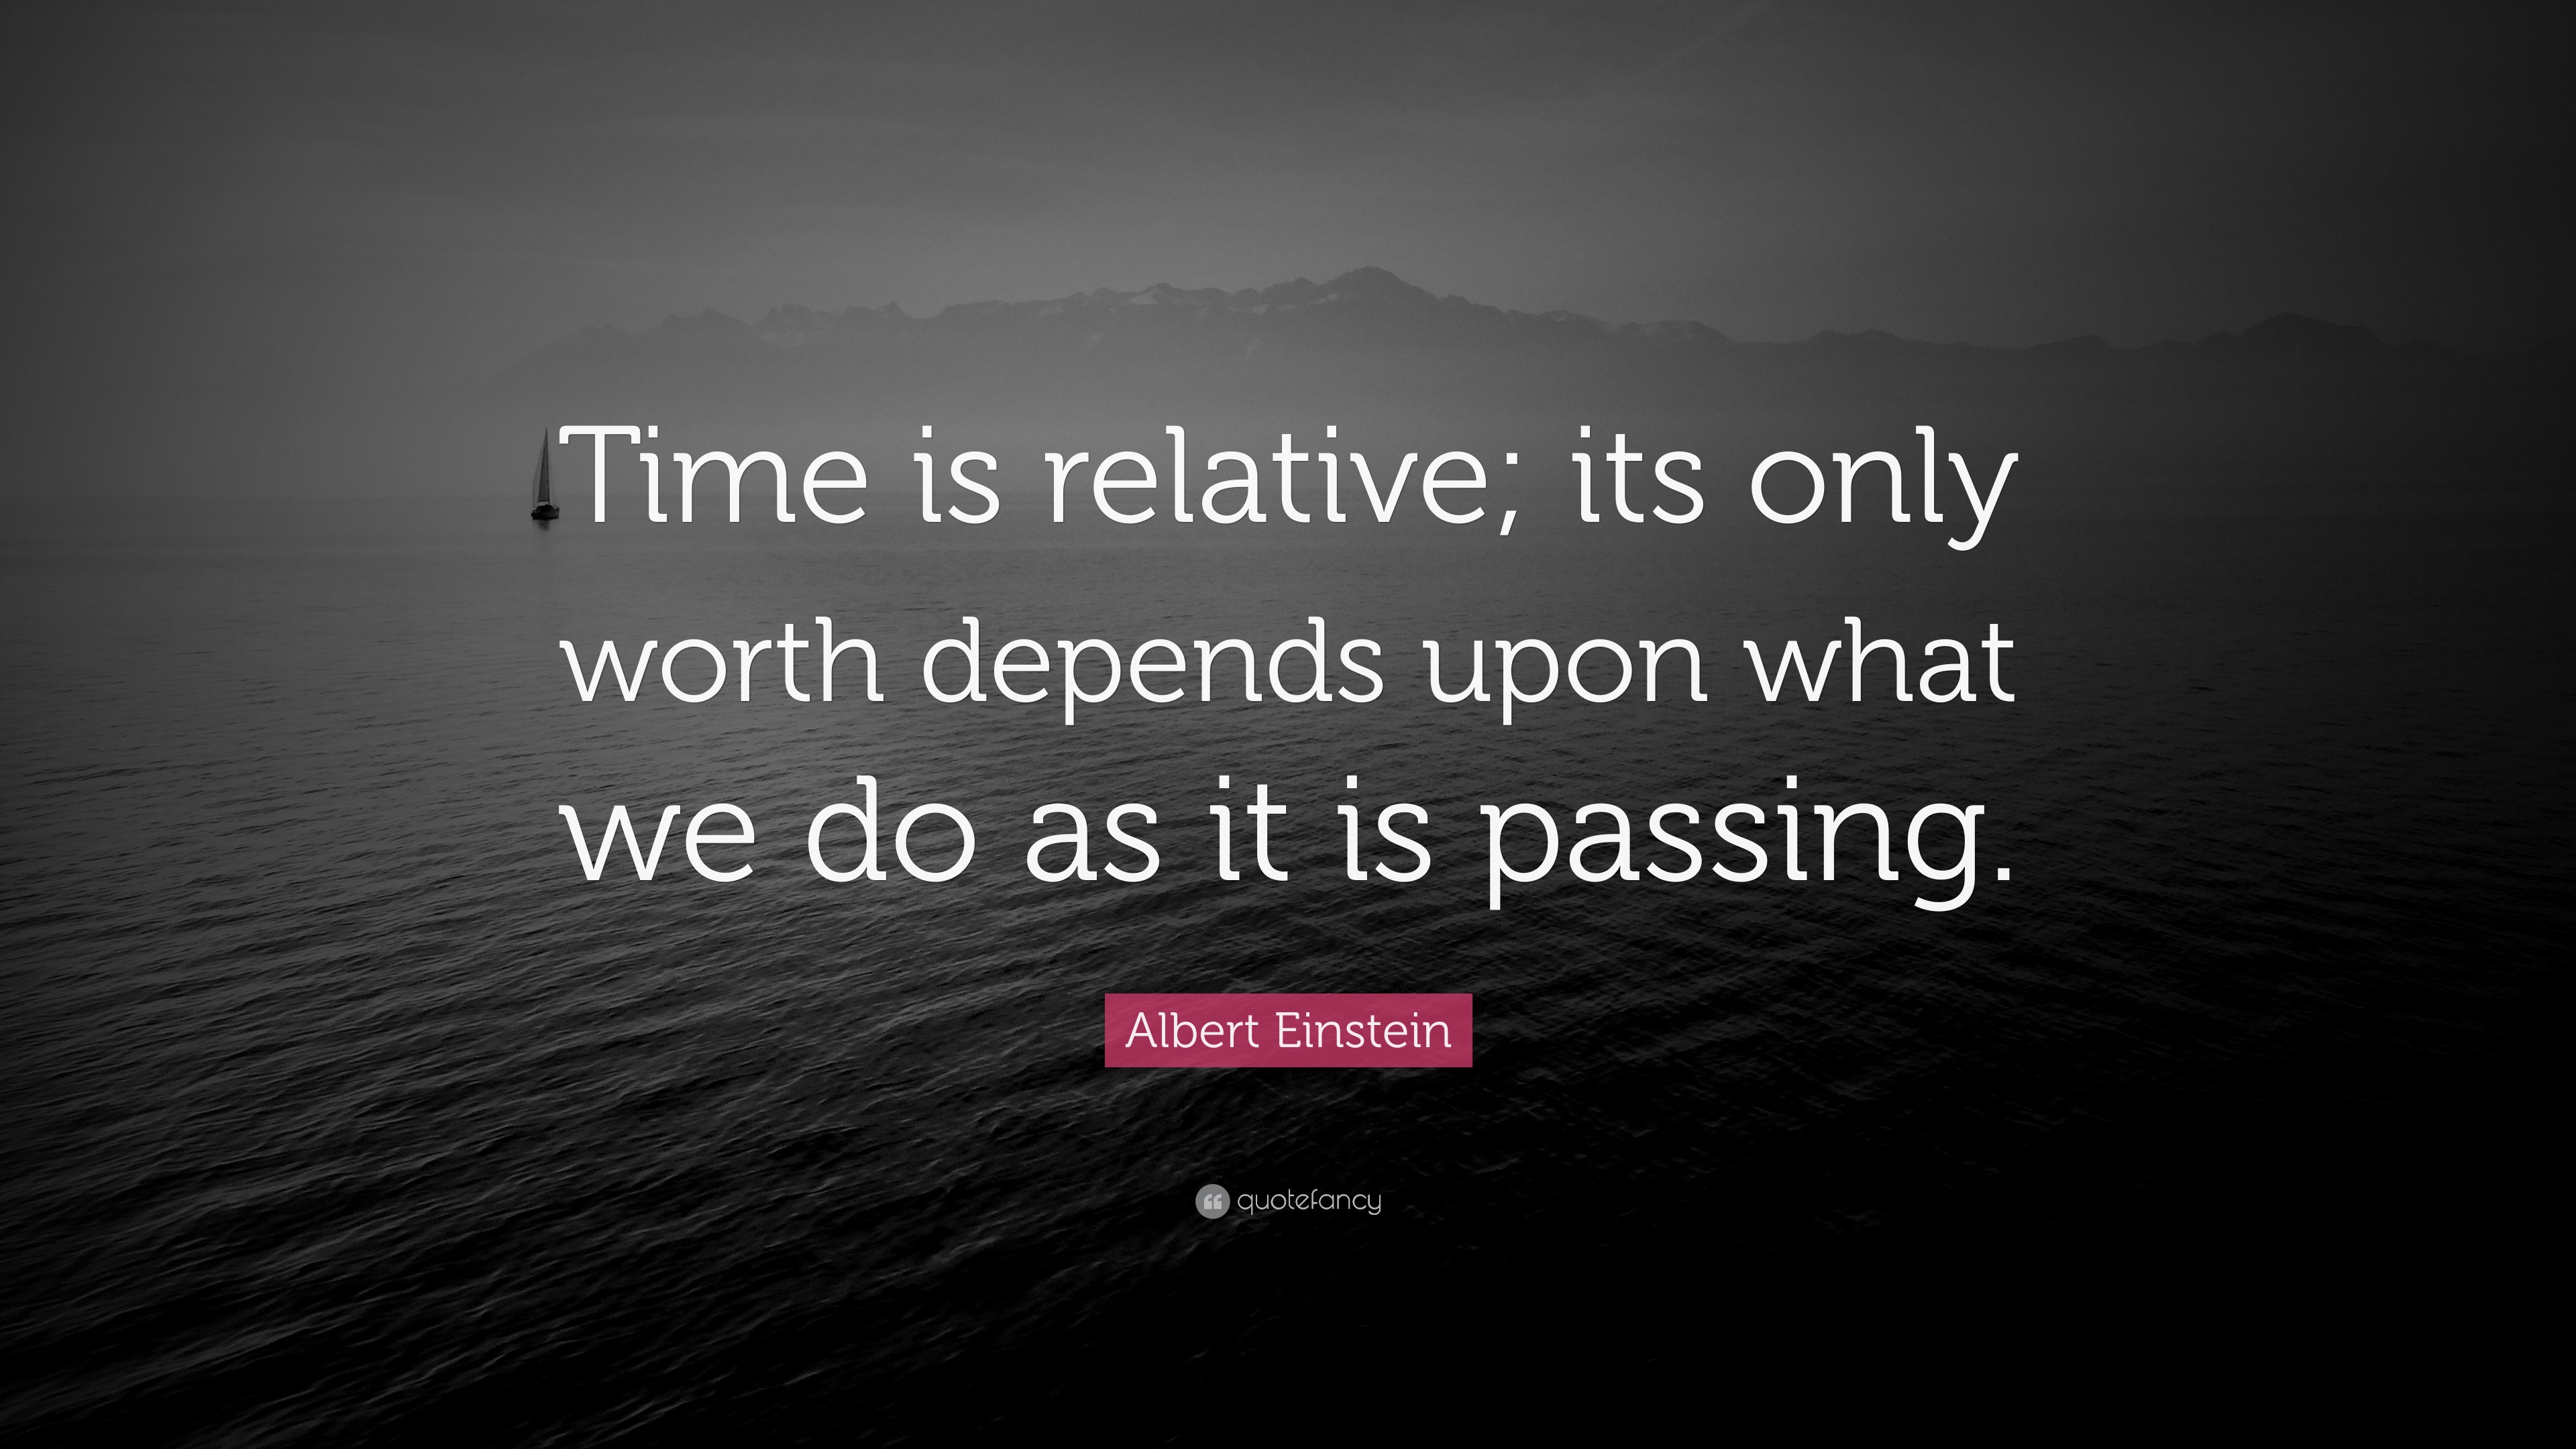 Albert Einstein Quote: “Time is relative; its only worth depends upon